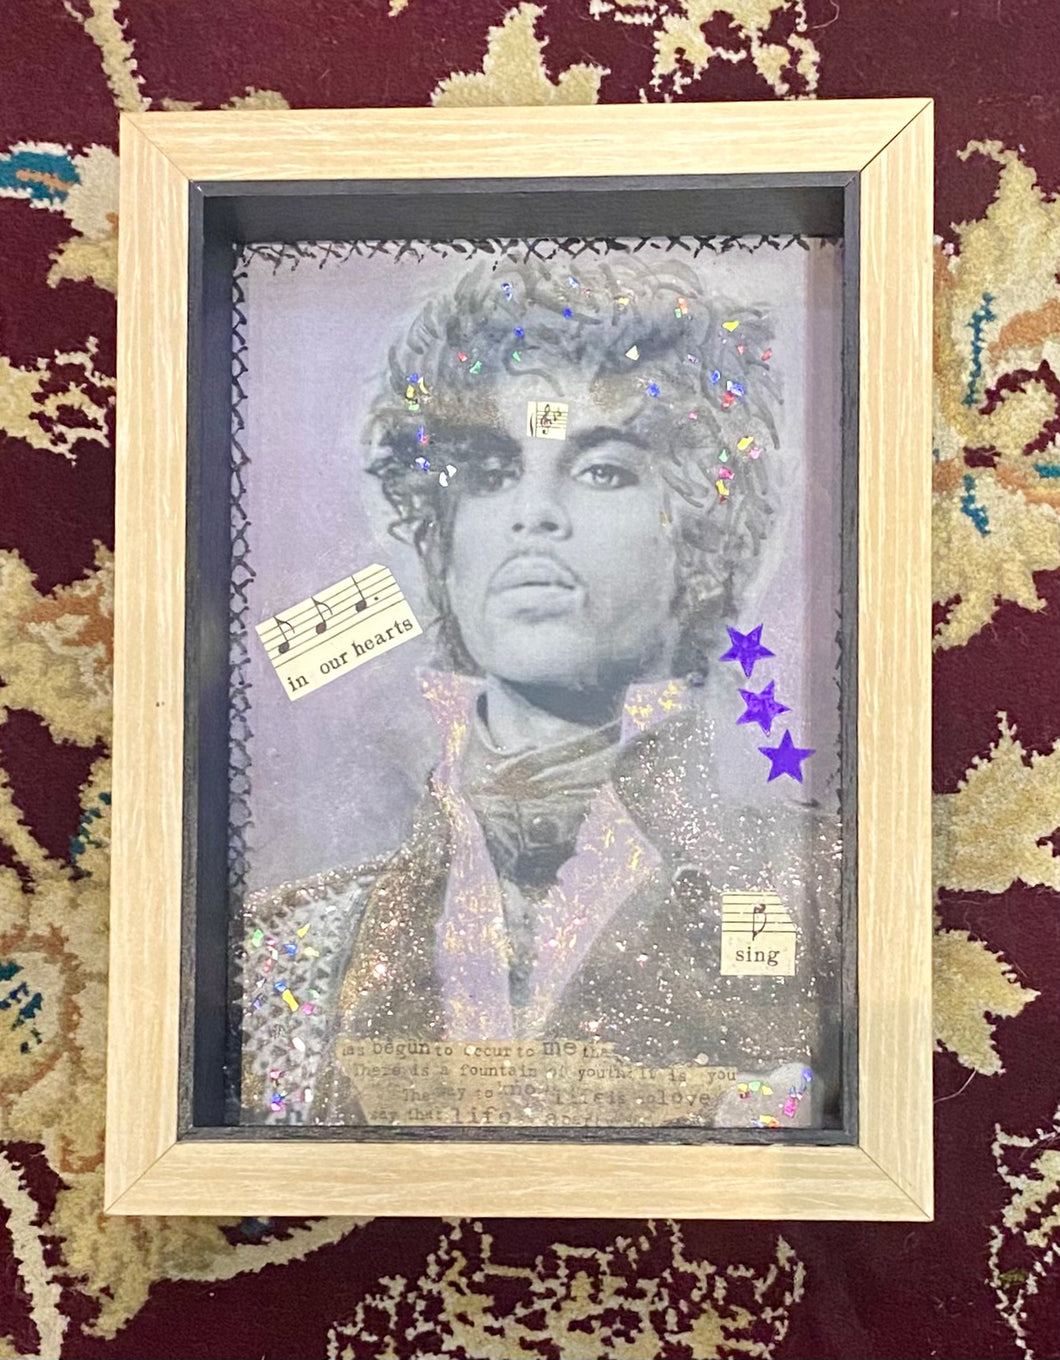 Prince Collage Picure #2 In Our Hearts